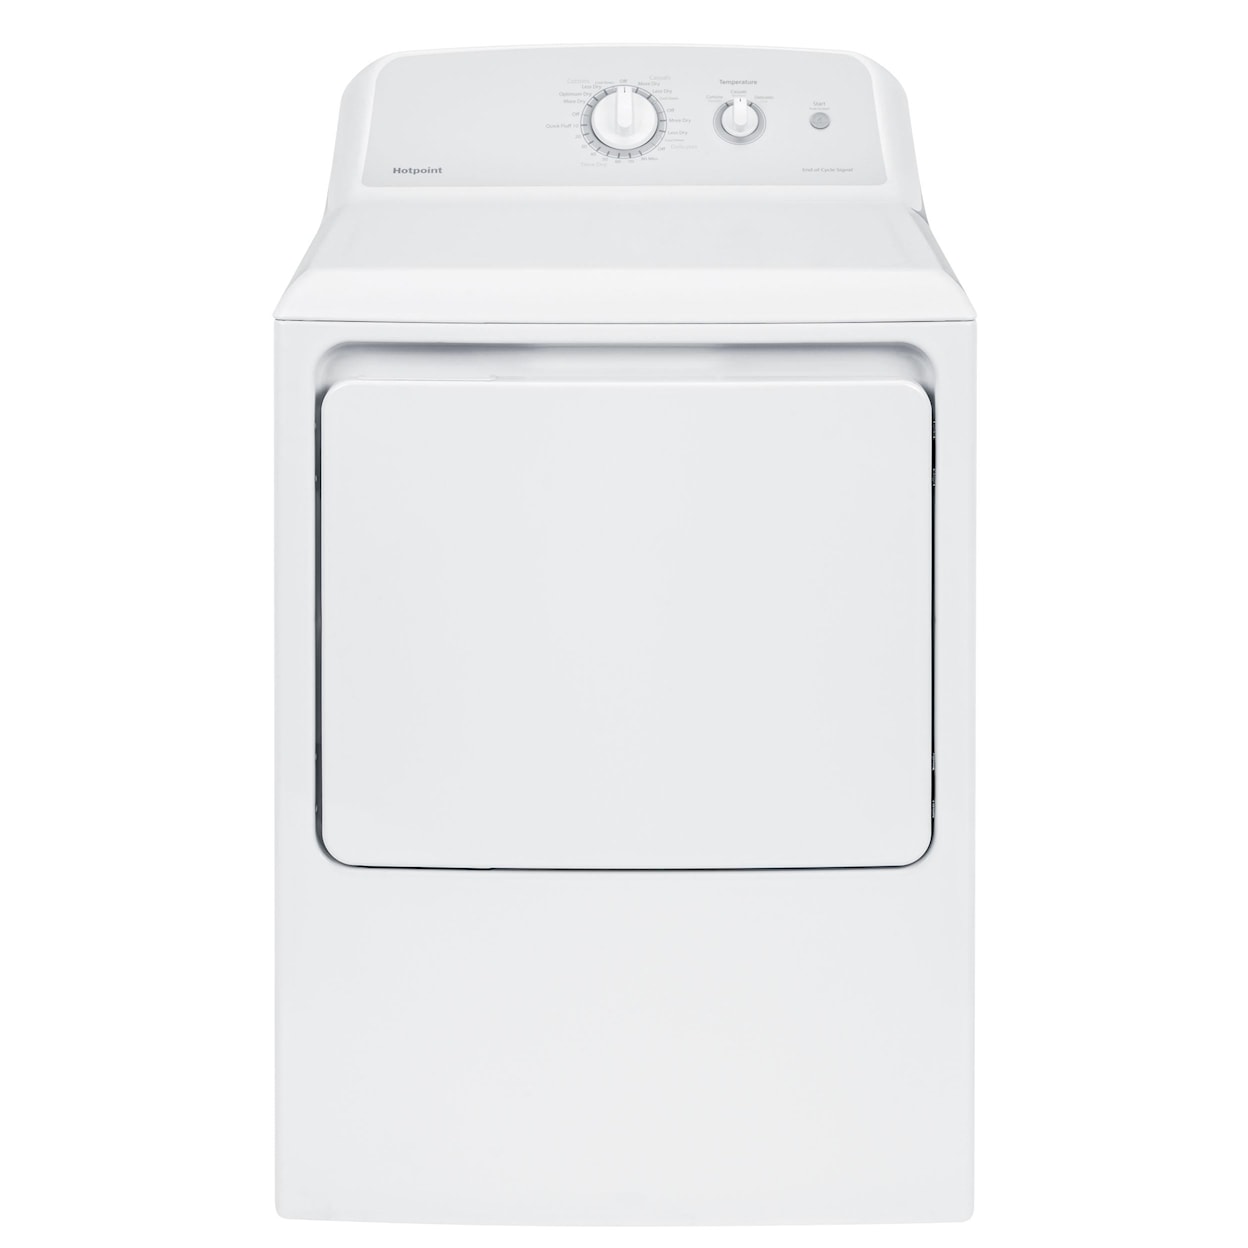 Hotpoint Laundry Top Load Matching Gas Dryer